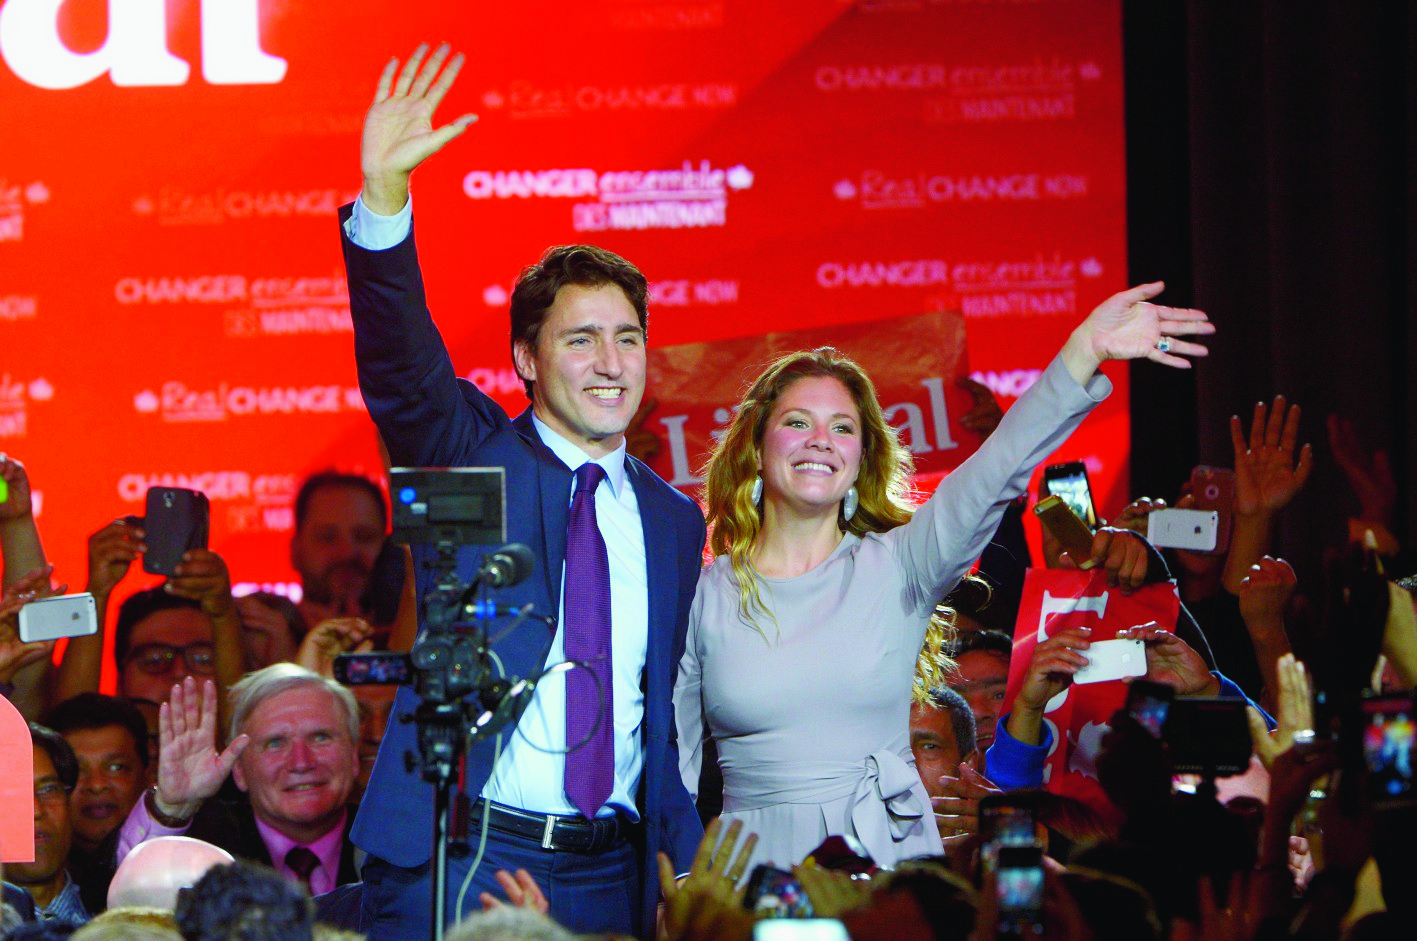 Liberal leader Justin Trudeau waves with his wife Sophie Gregoire at the Liberal party headquarters in Montreal, Tuesday, Oct. 20, 2015. Trudeau, the son of late Prime Minister Pierre Trudeau, became Canadas new prime minister after beating Conservative Stephen Harper. (Paul Chiasson/The Canadian Press via AP) MANDATORY CREDIT Canada Election